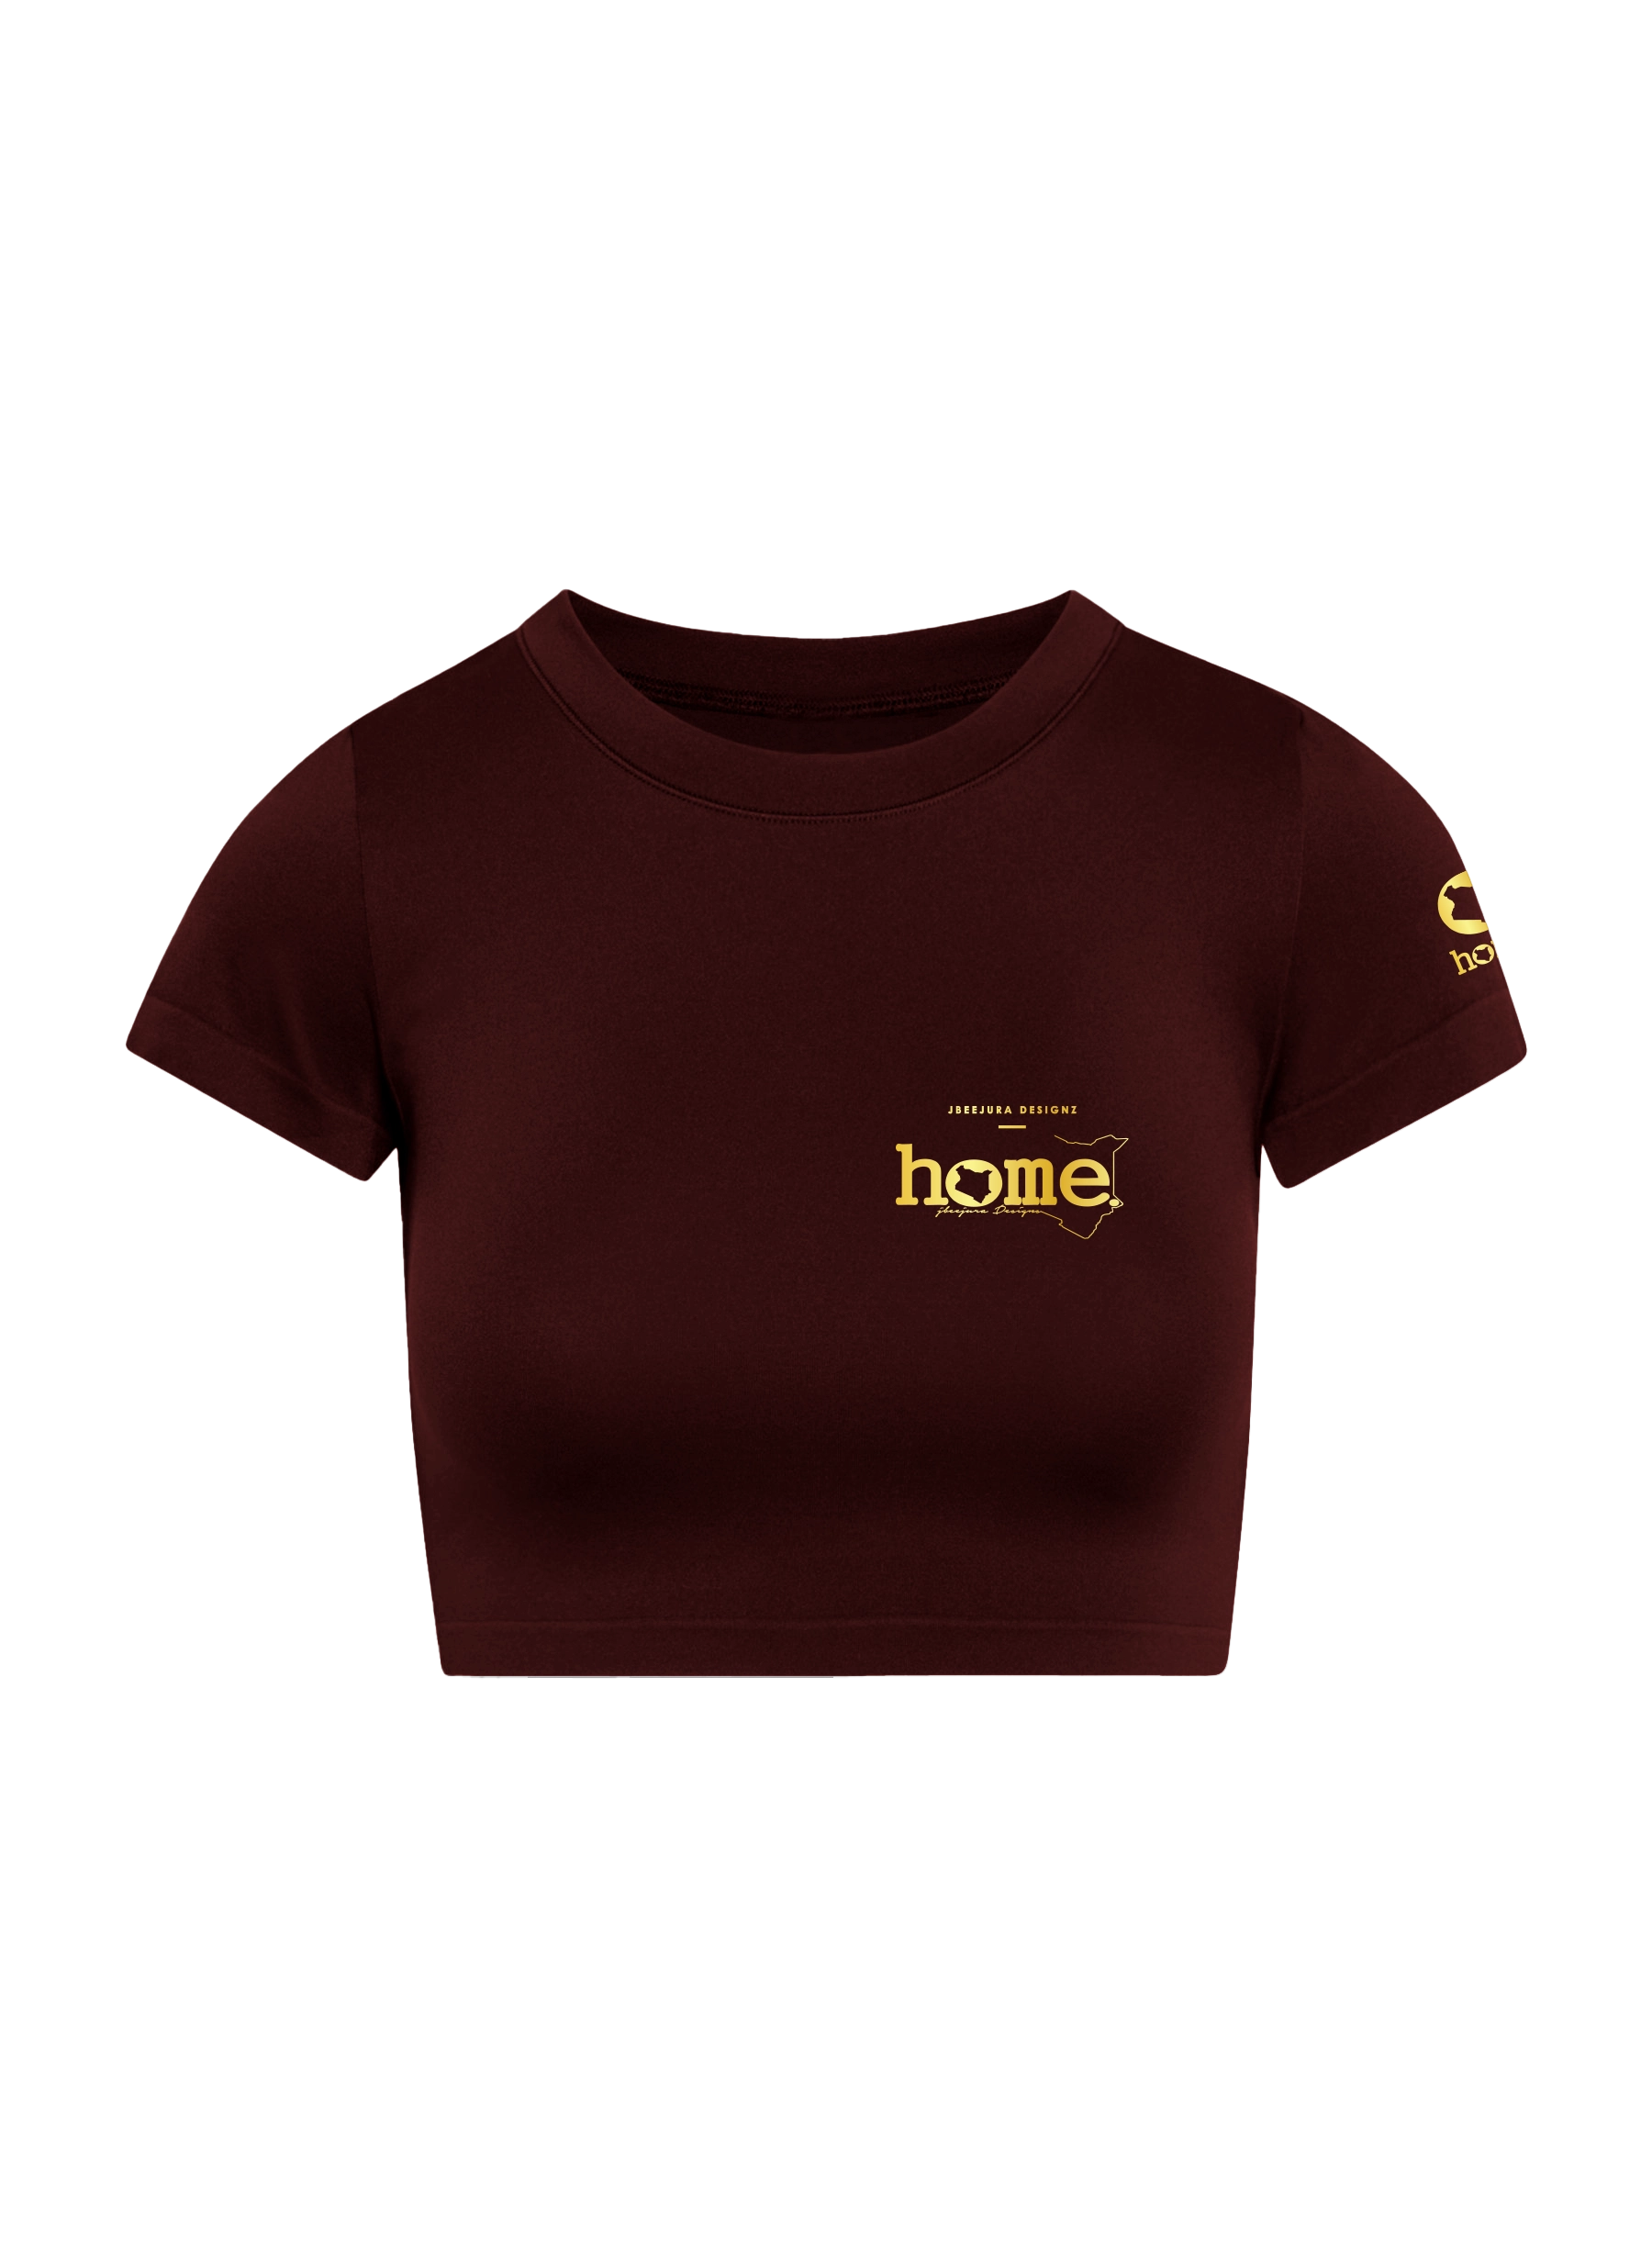 home_254 SHORT SLEEVED MAROON CROPPED ARIA TEE WITH A GOLD 3D WORDS PRINT 